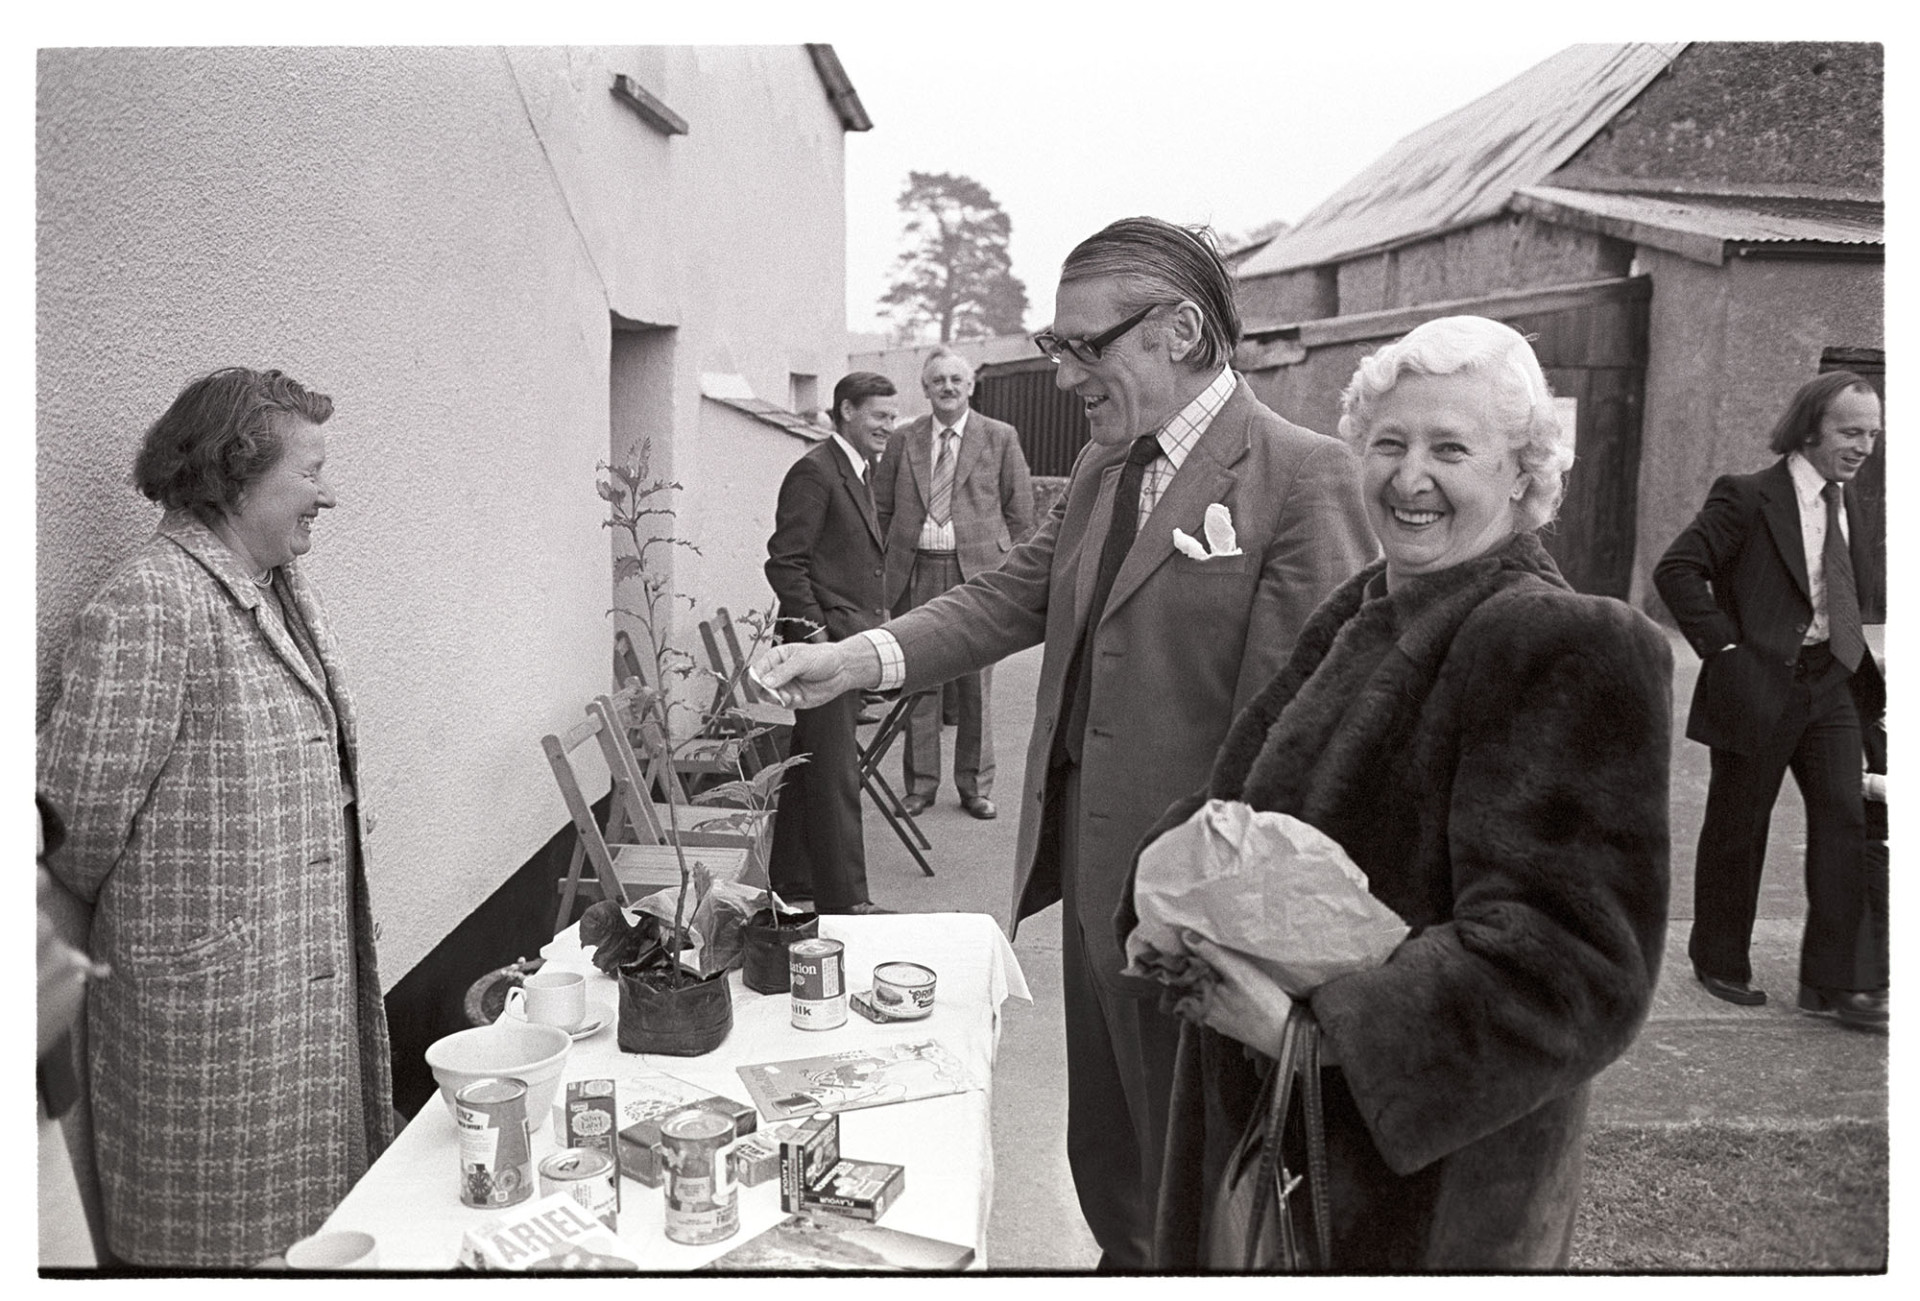 Conservative Party fete at farm, MP and woman at produce stall. 
[Peter Mills MP and a woman looking at a plant on a stall at the Conservative Party Fete at great Cudworthy Farm, Dolton.]